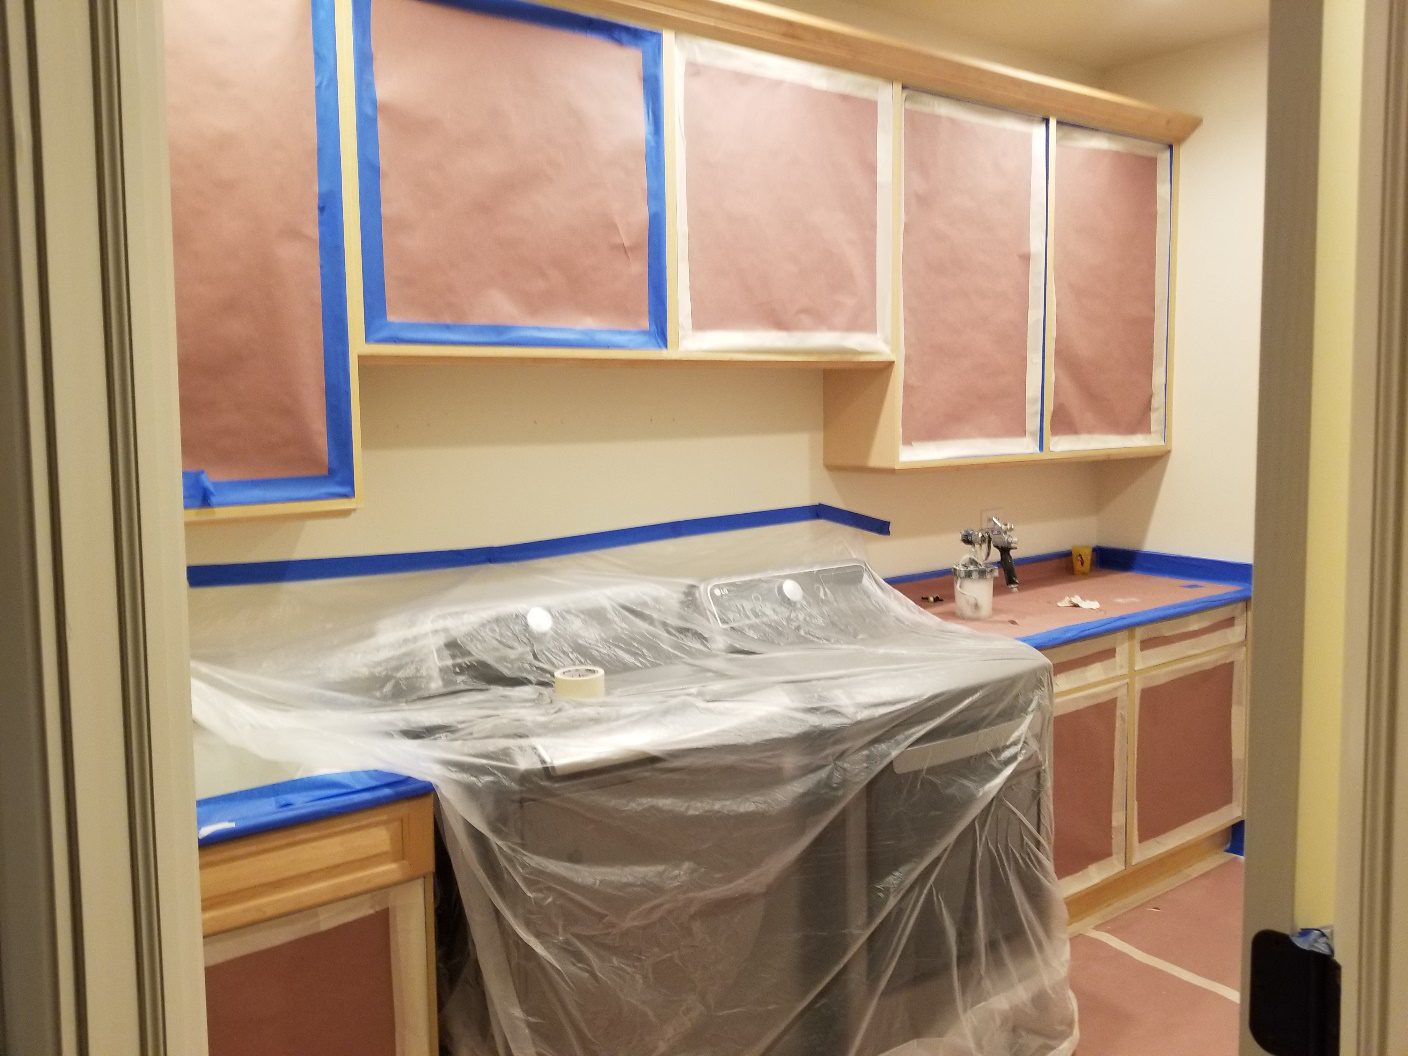 A kitchen with cabinets and appliances covered in plastic.